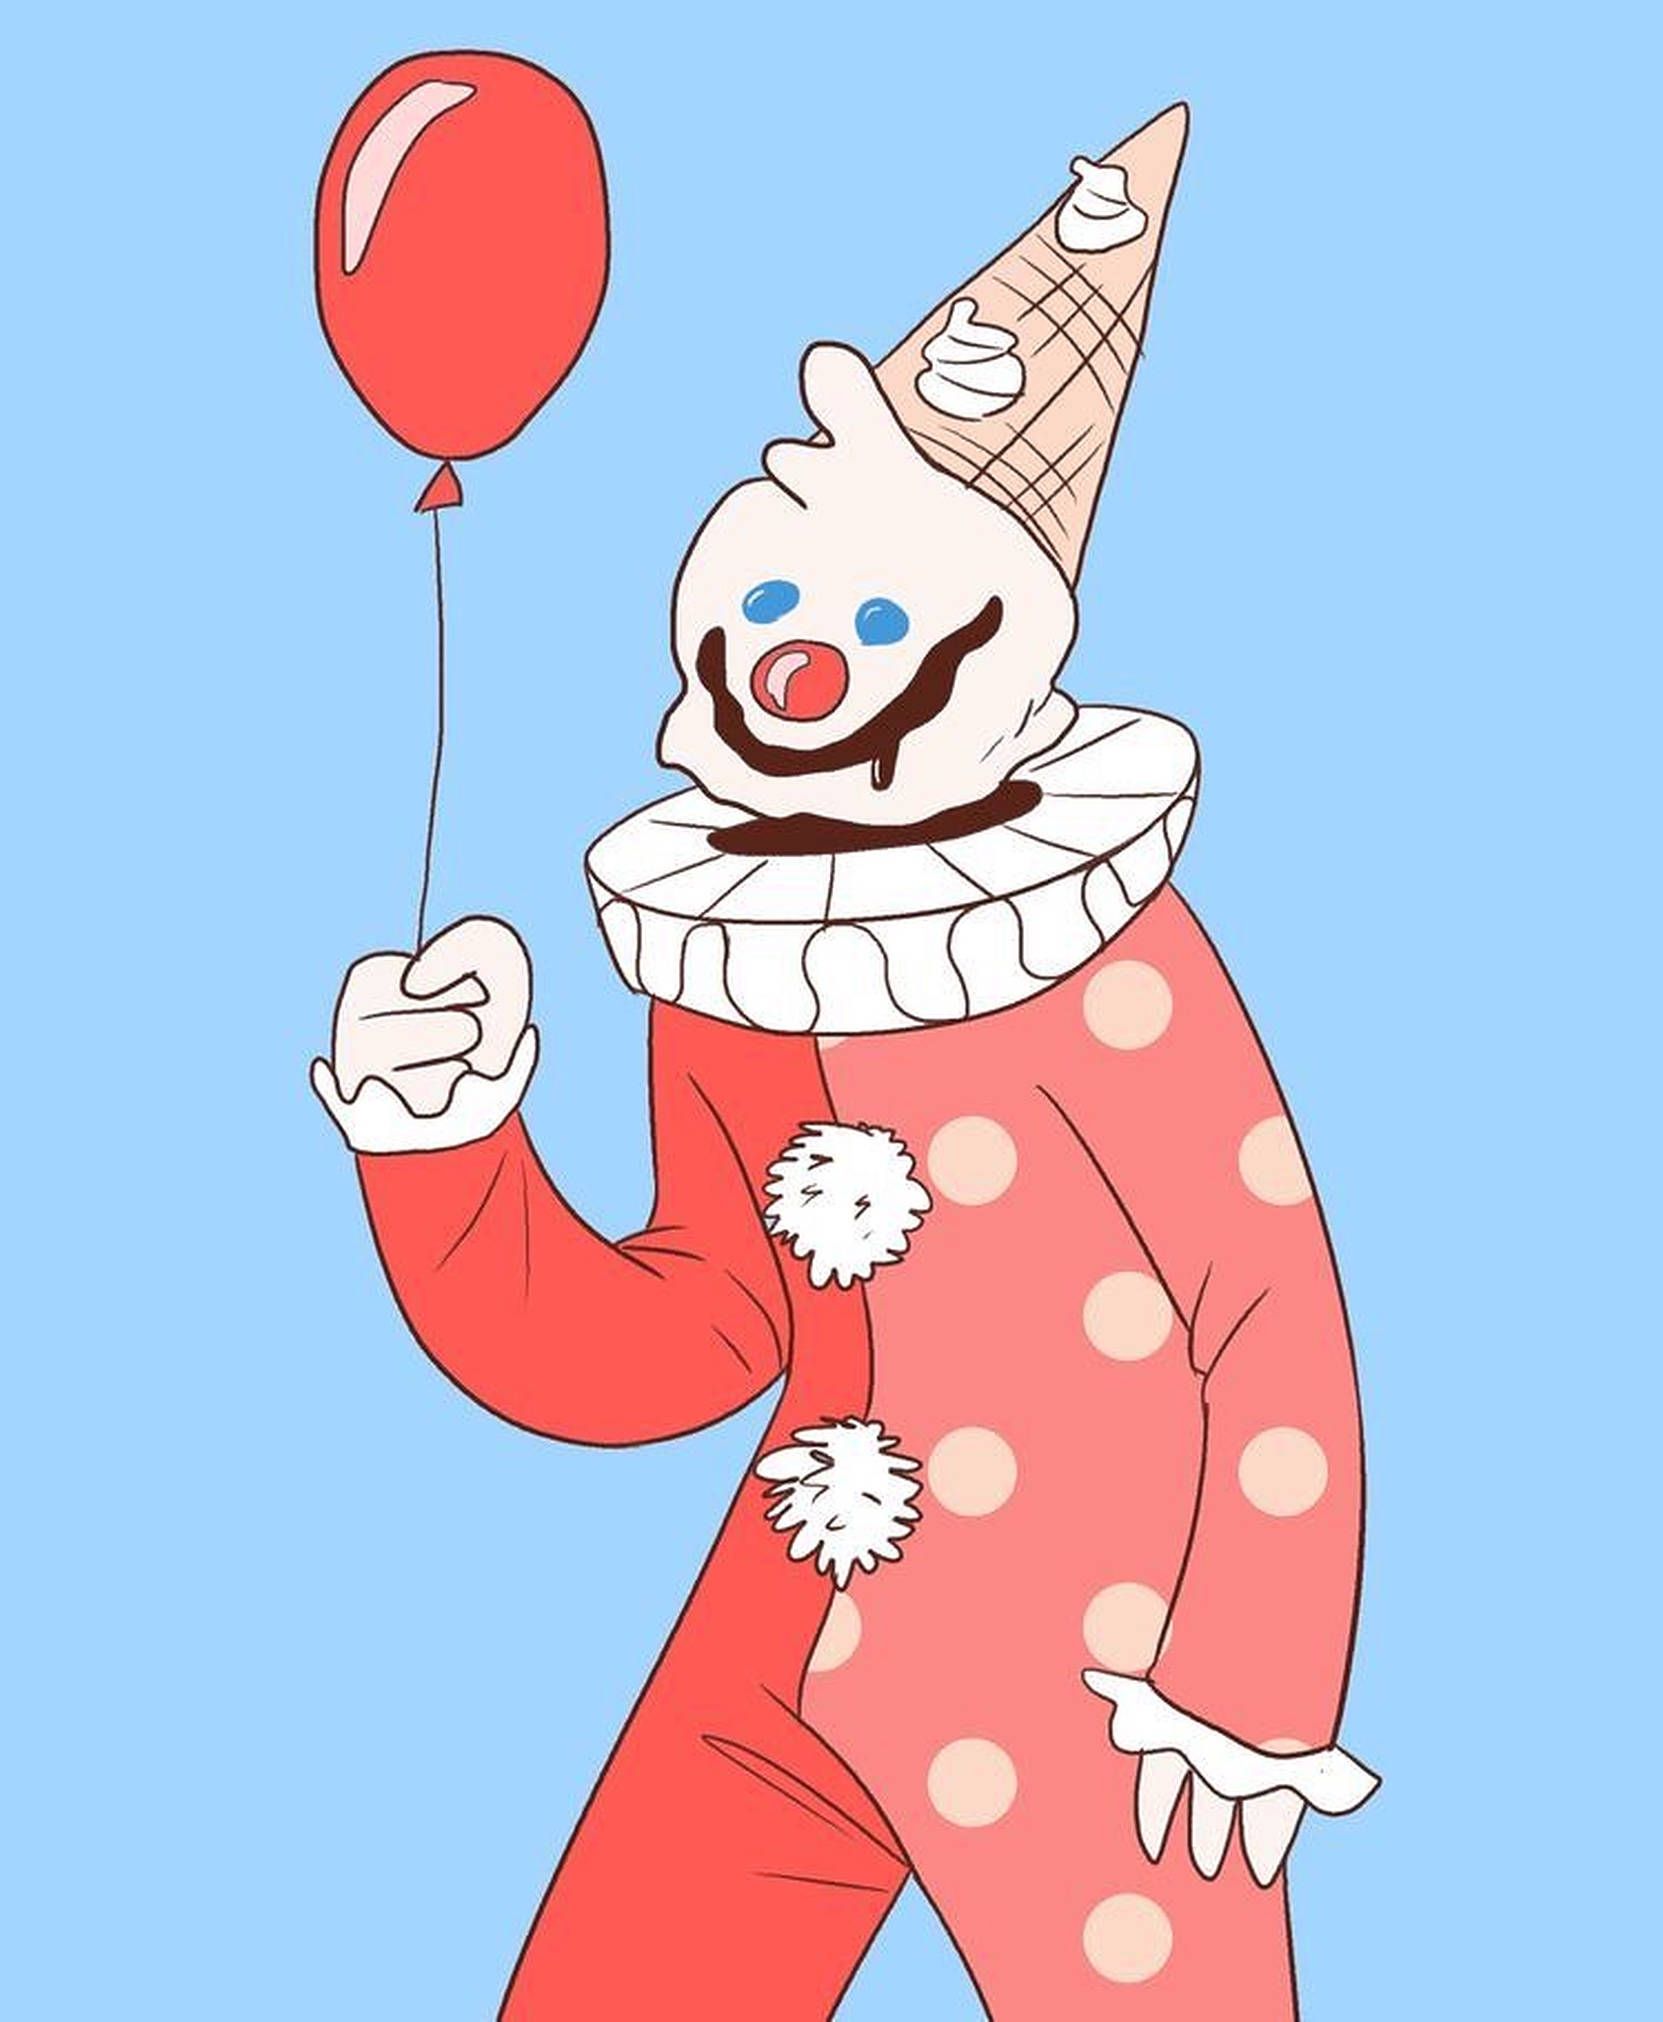 Download Clown With Red Balloon Wallpaper